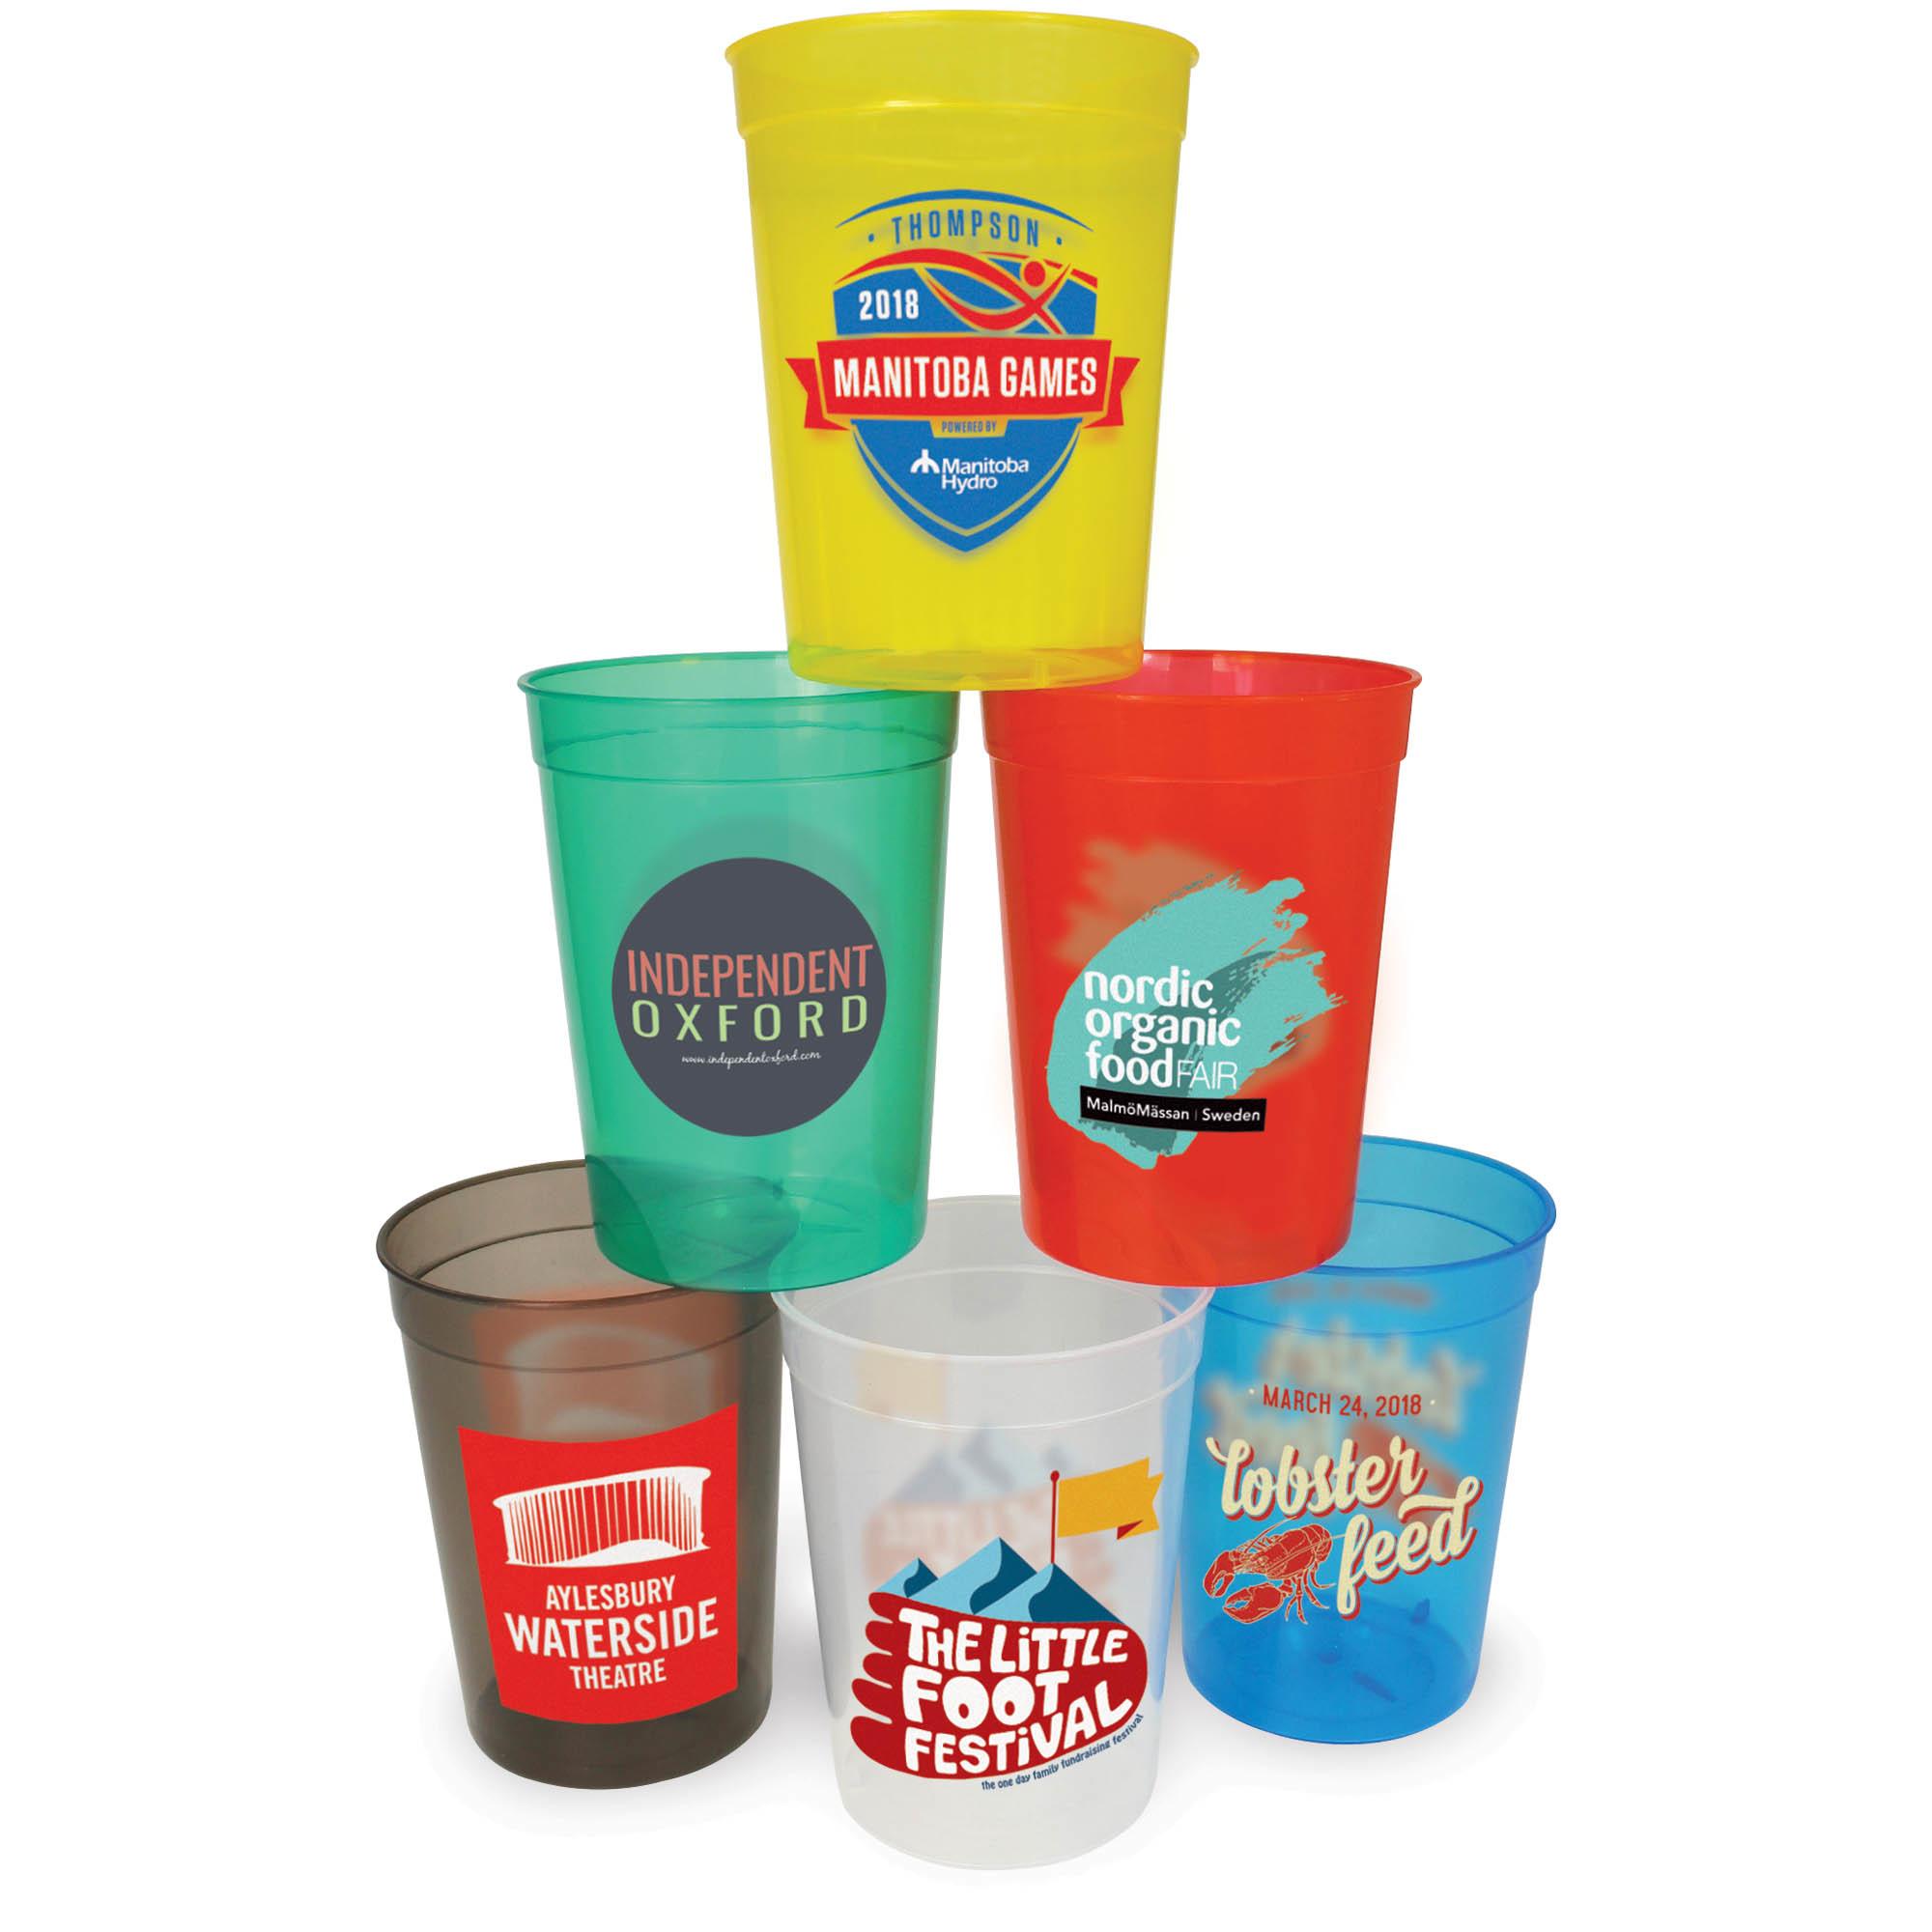 Custom Printed Recyclable Festival Cups - MADE IN UK - 2